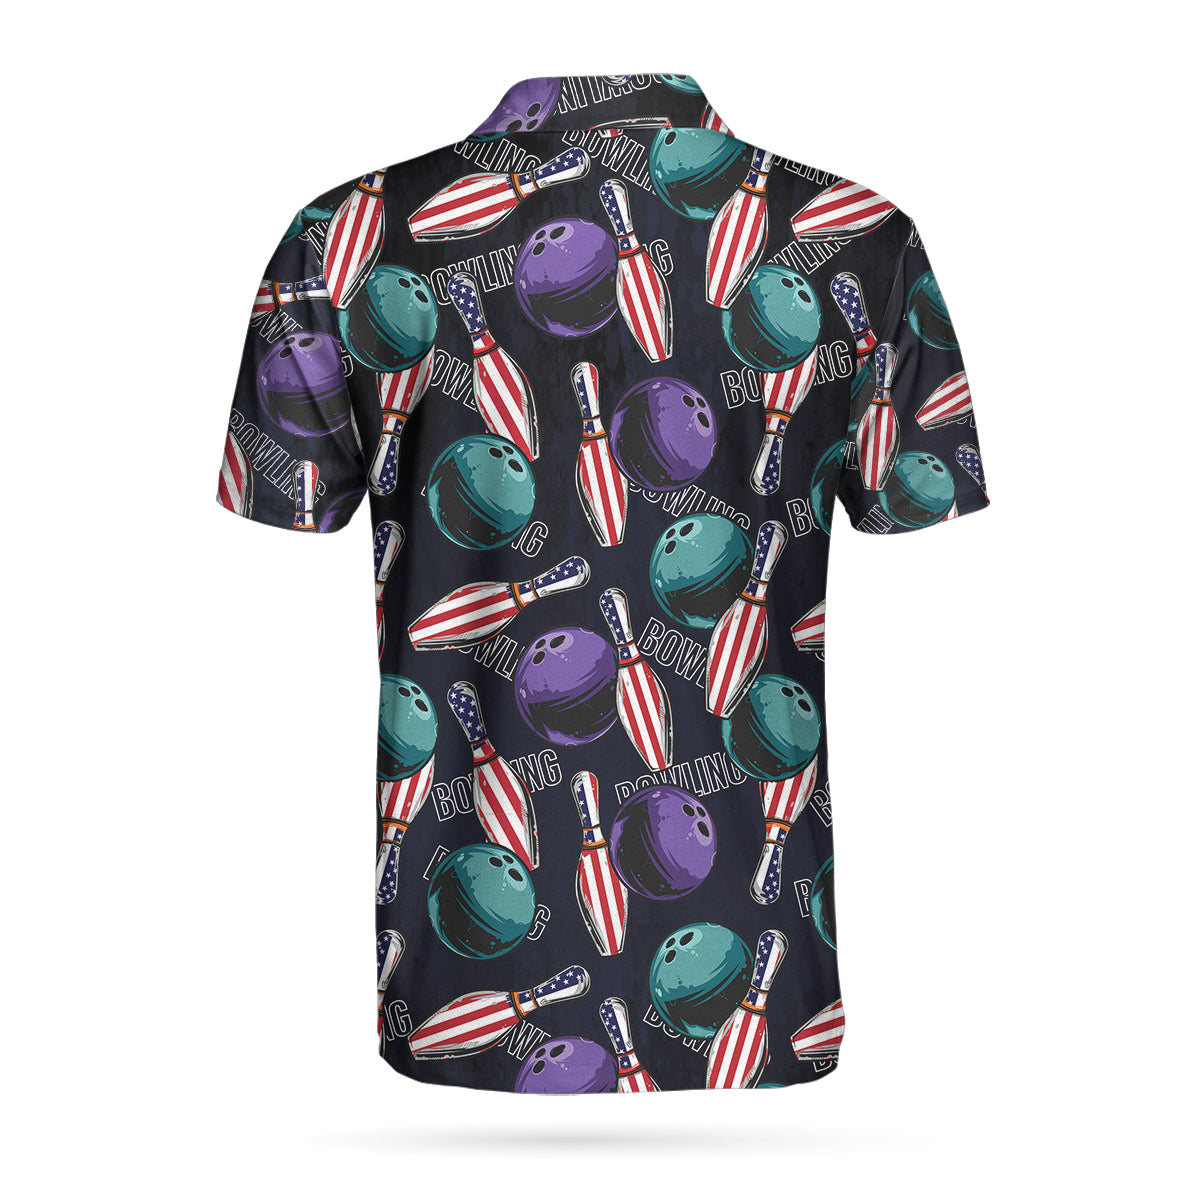 Bowling Is My Life Polo Shirt/ American Flag Pattern Bowling Shirt For Men Coolspod